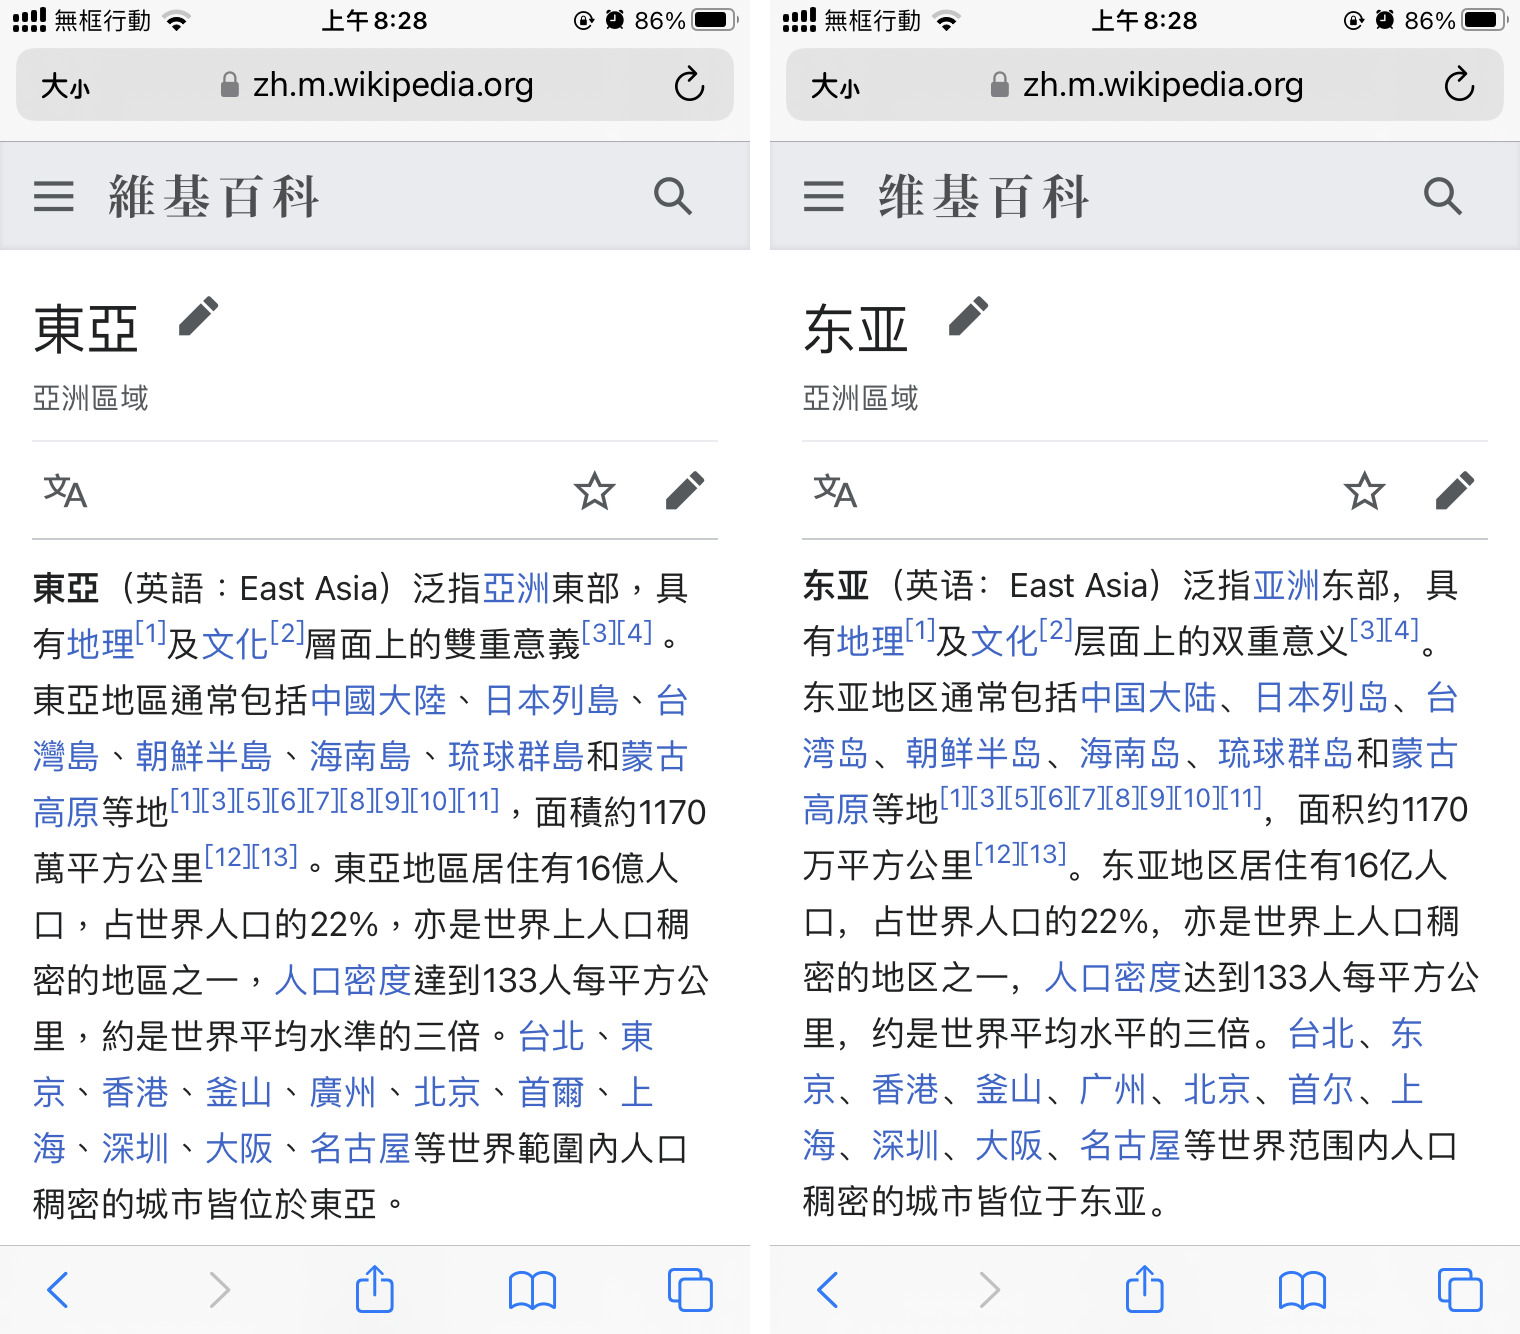 Chinese wikipedia script variants